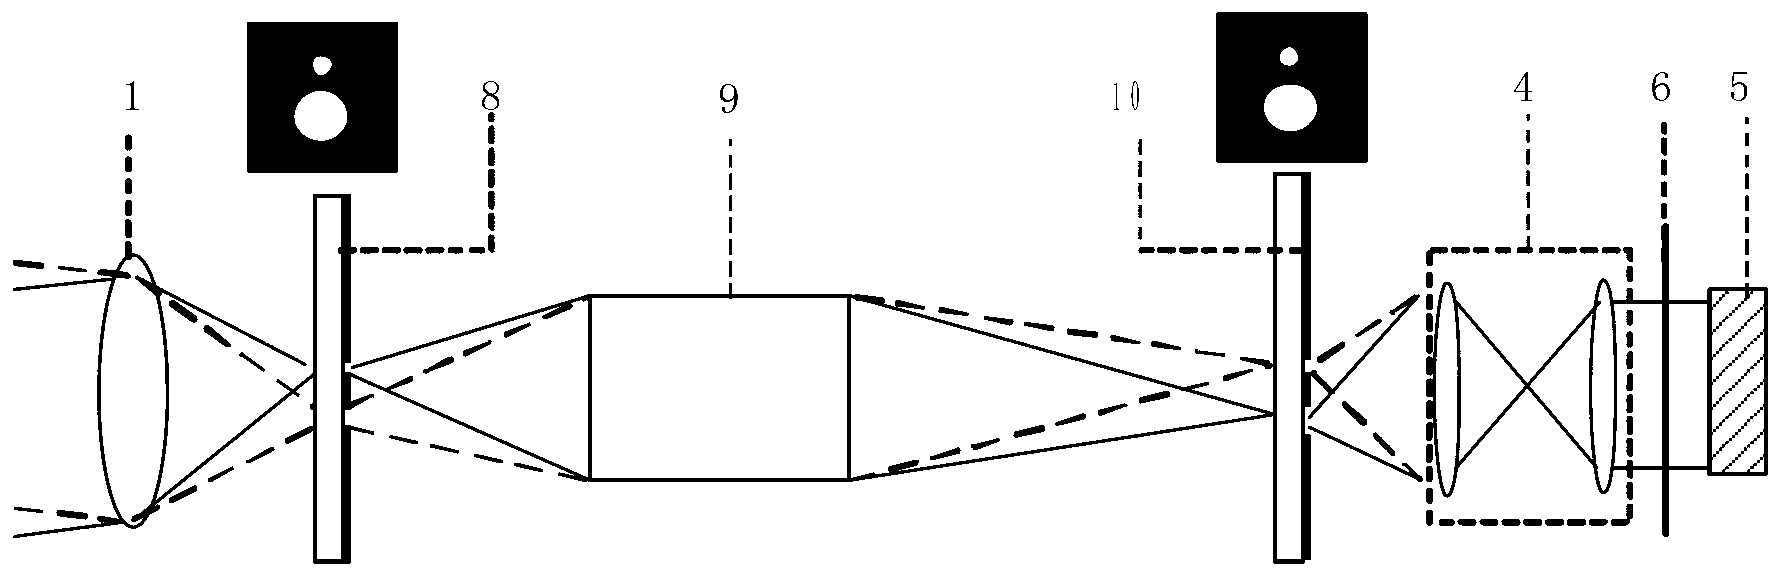 Method used for improving measuring accuracy of point-diffraction interferometer